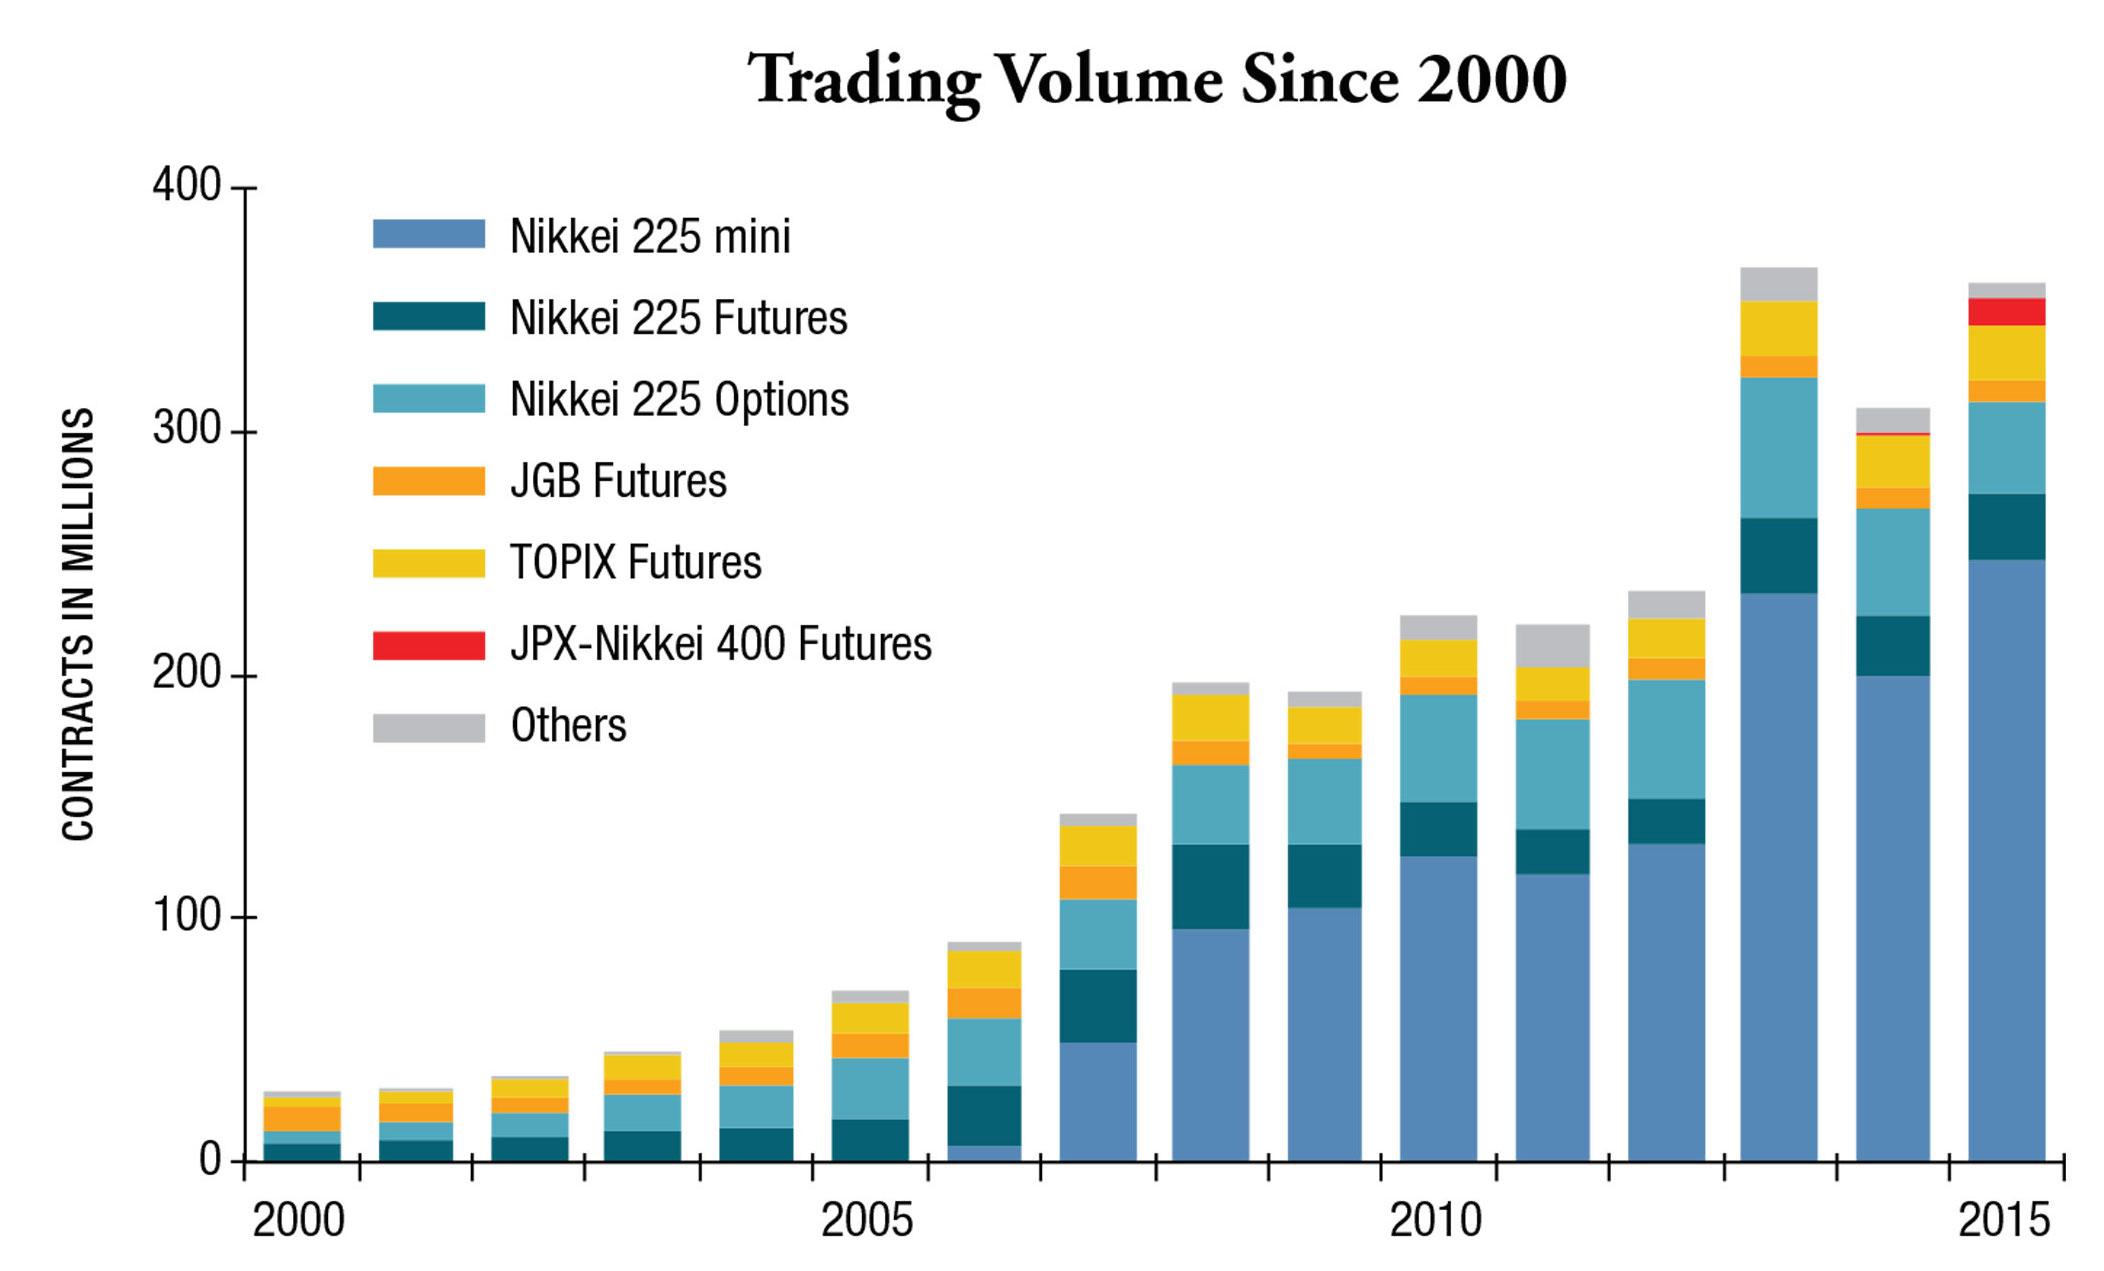 Trading Volume Since 2000